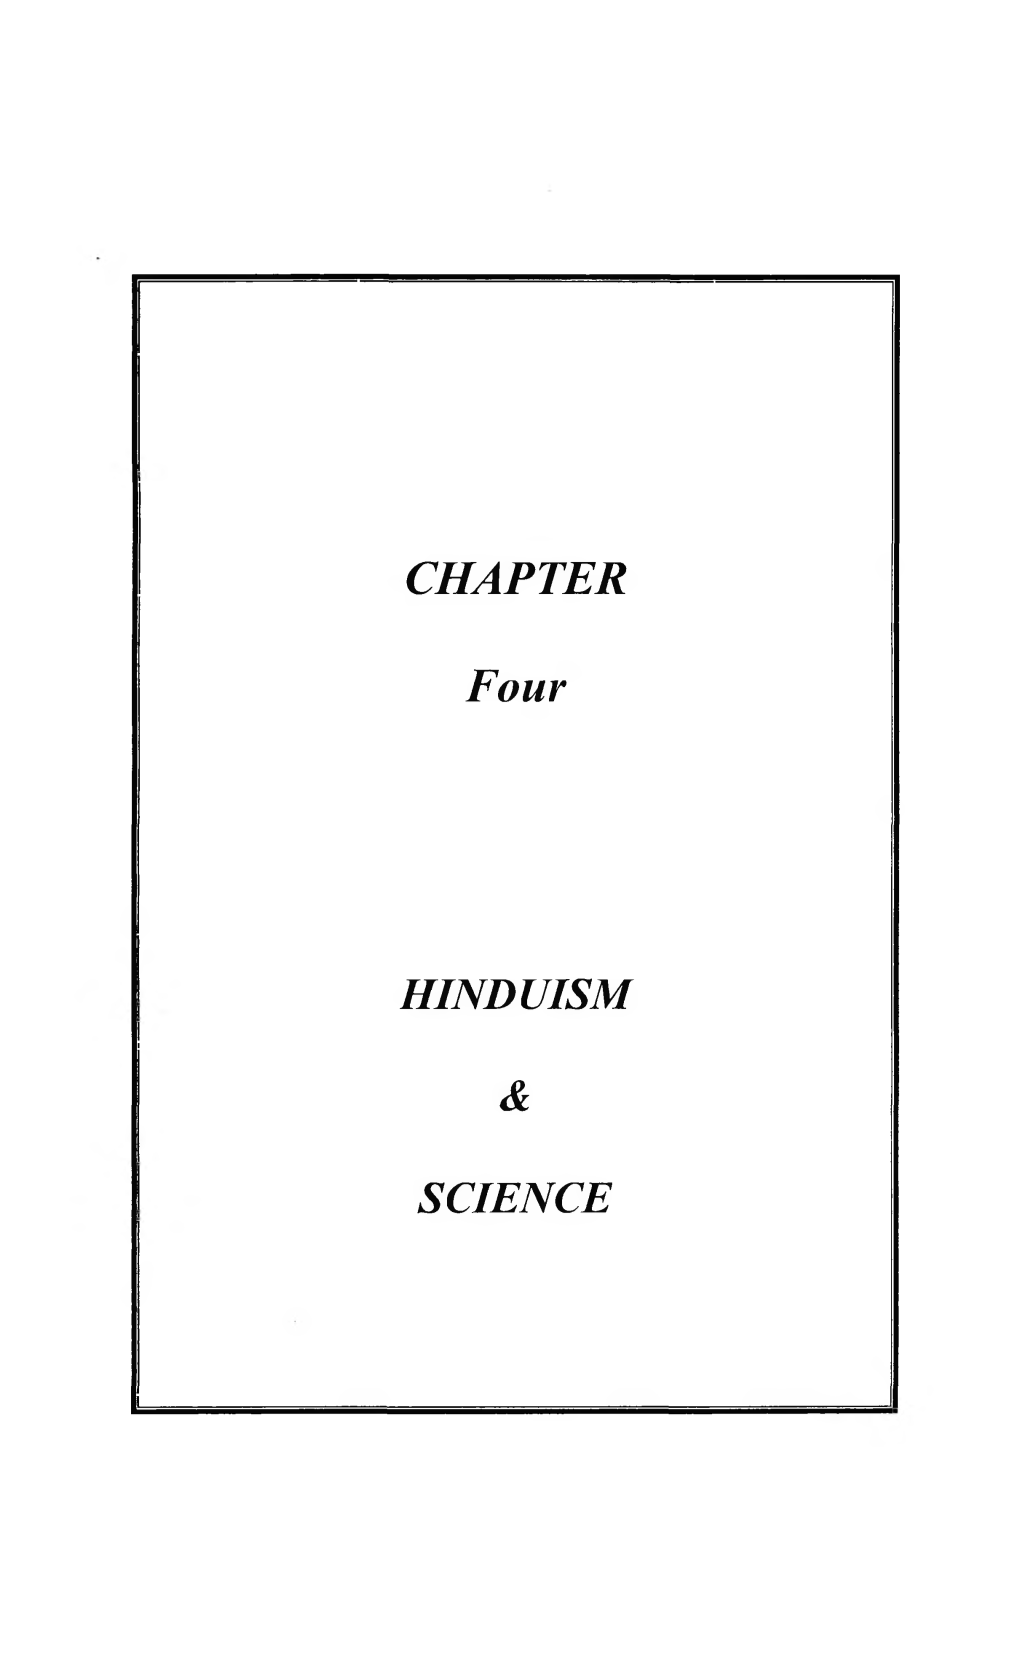 CHAPTER Four HINDUISM SCIENCE